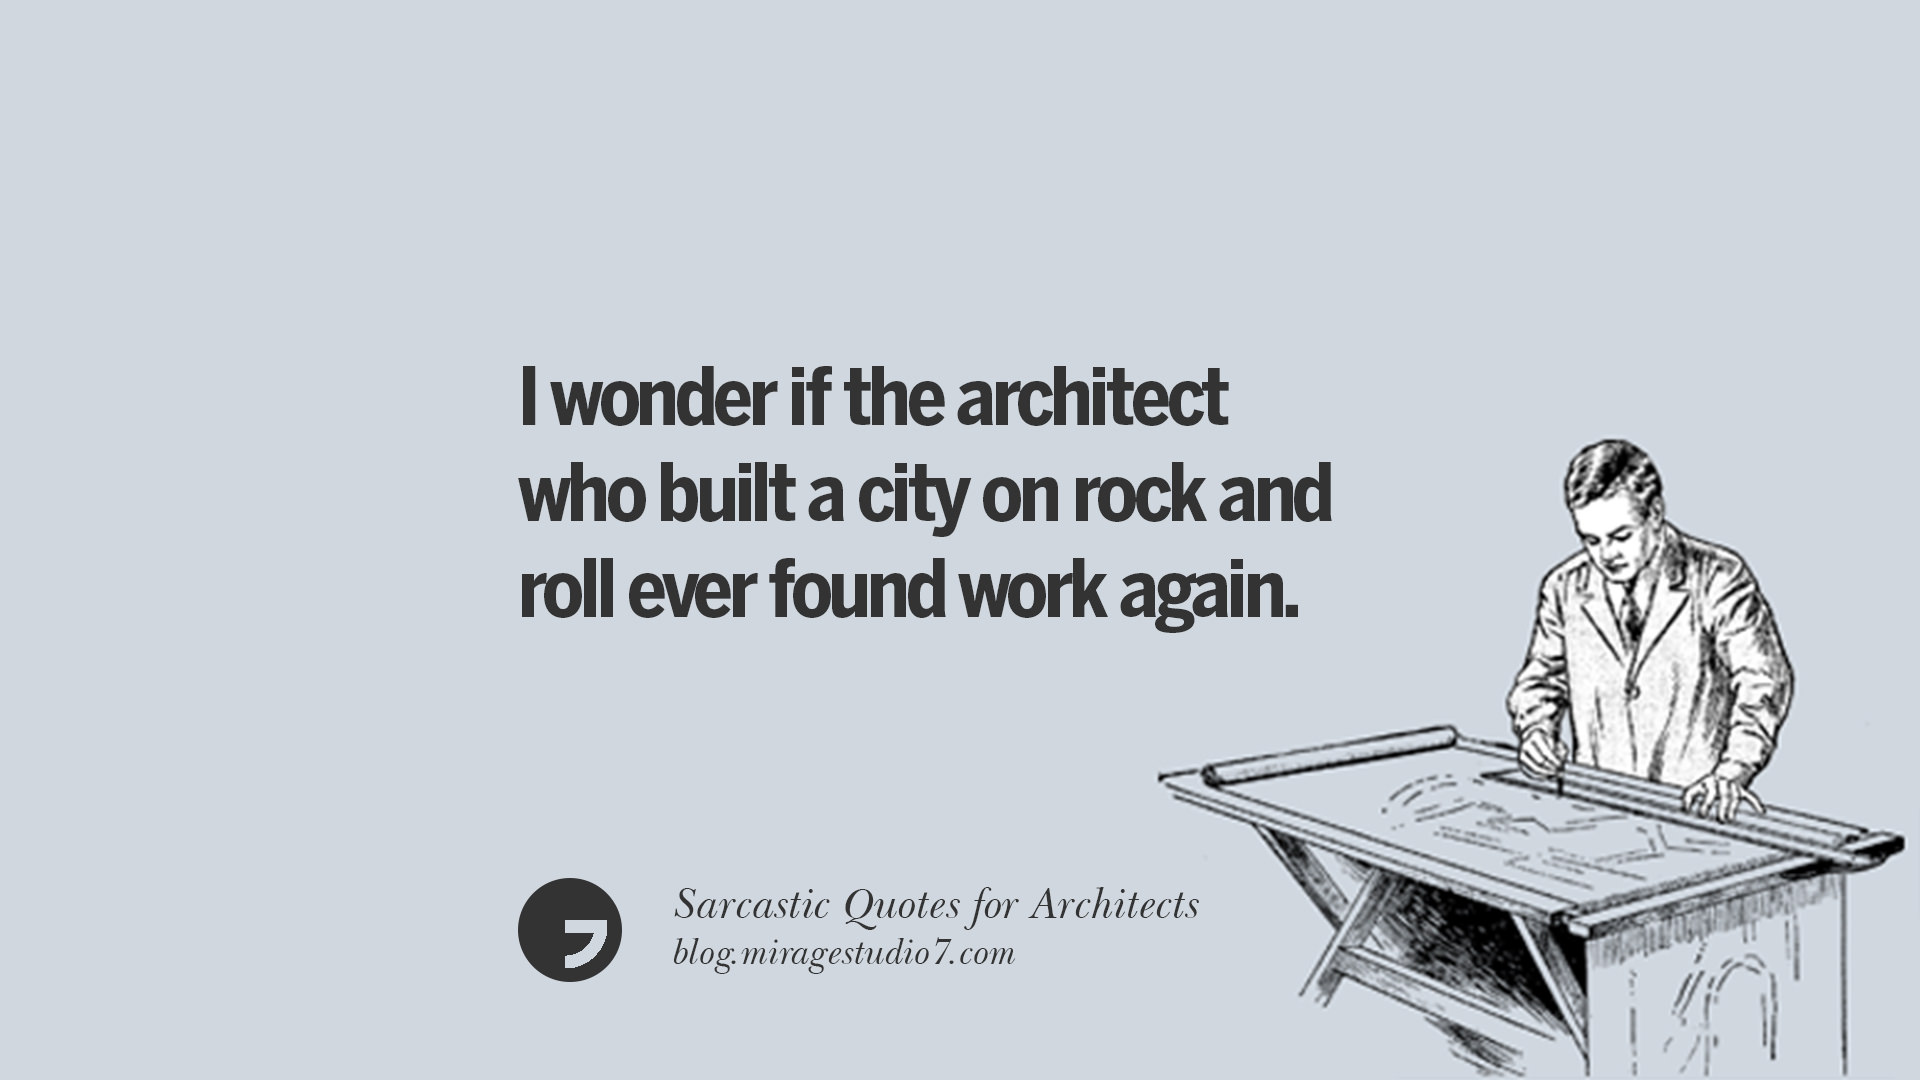 12 Sarcastic Catch Line For Architects and Interior Designers